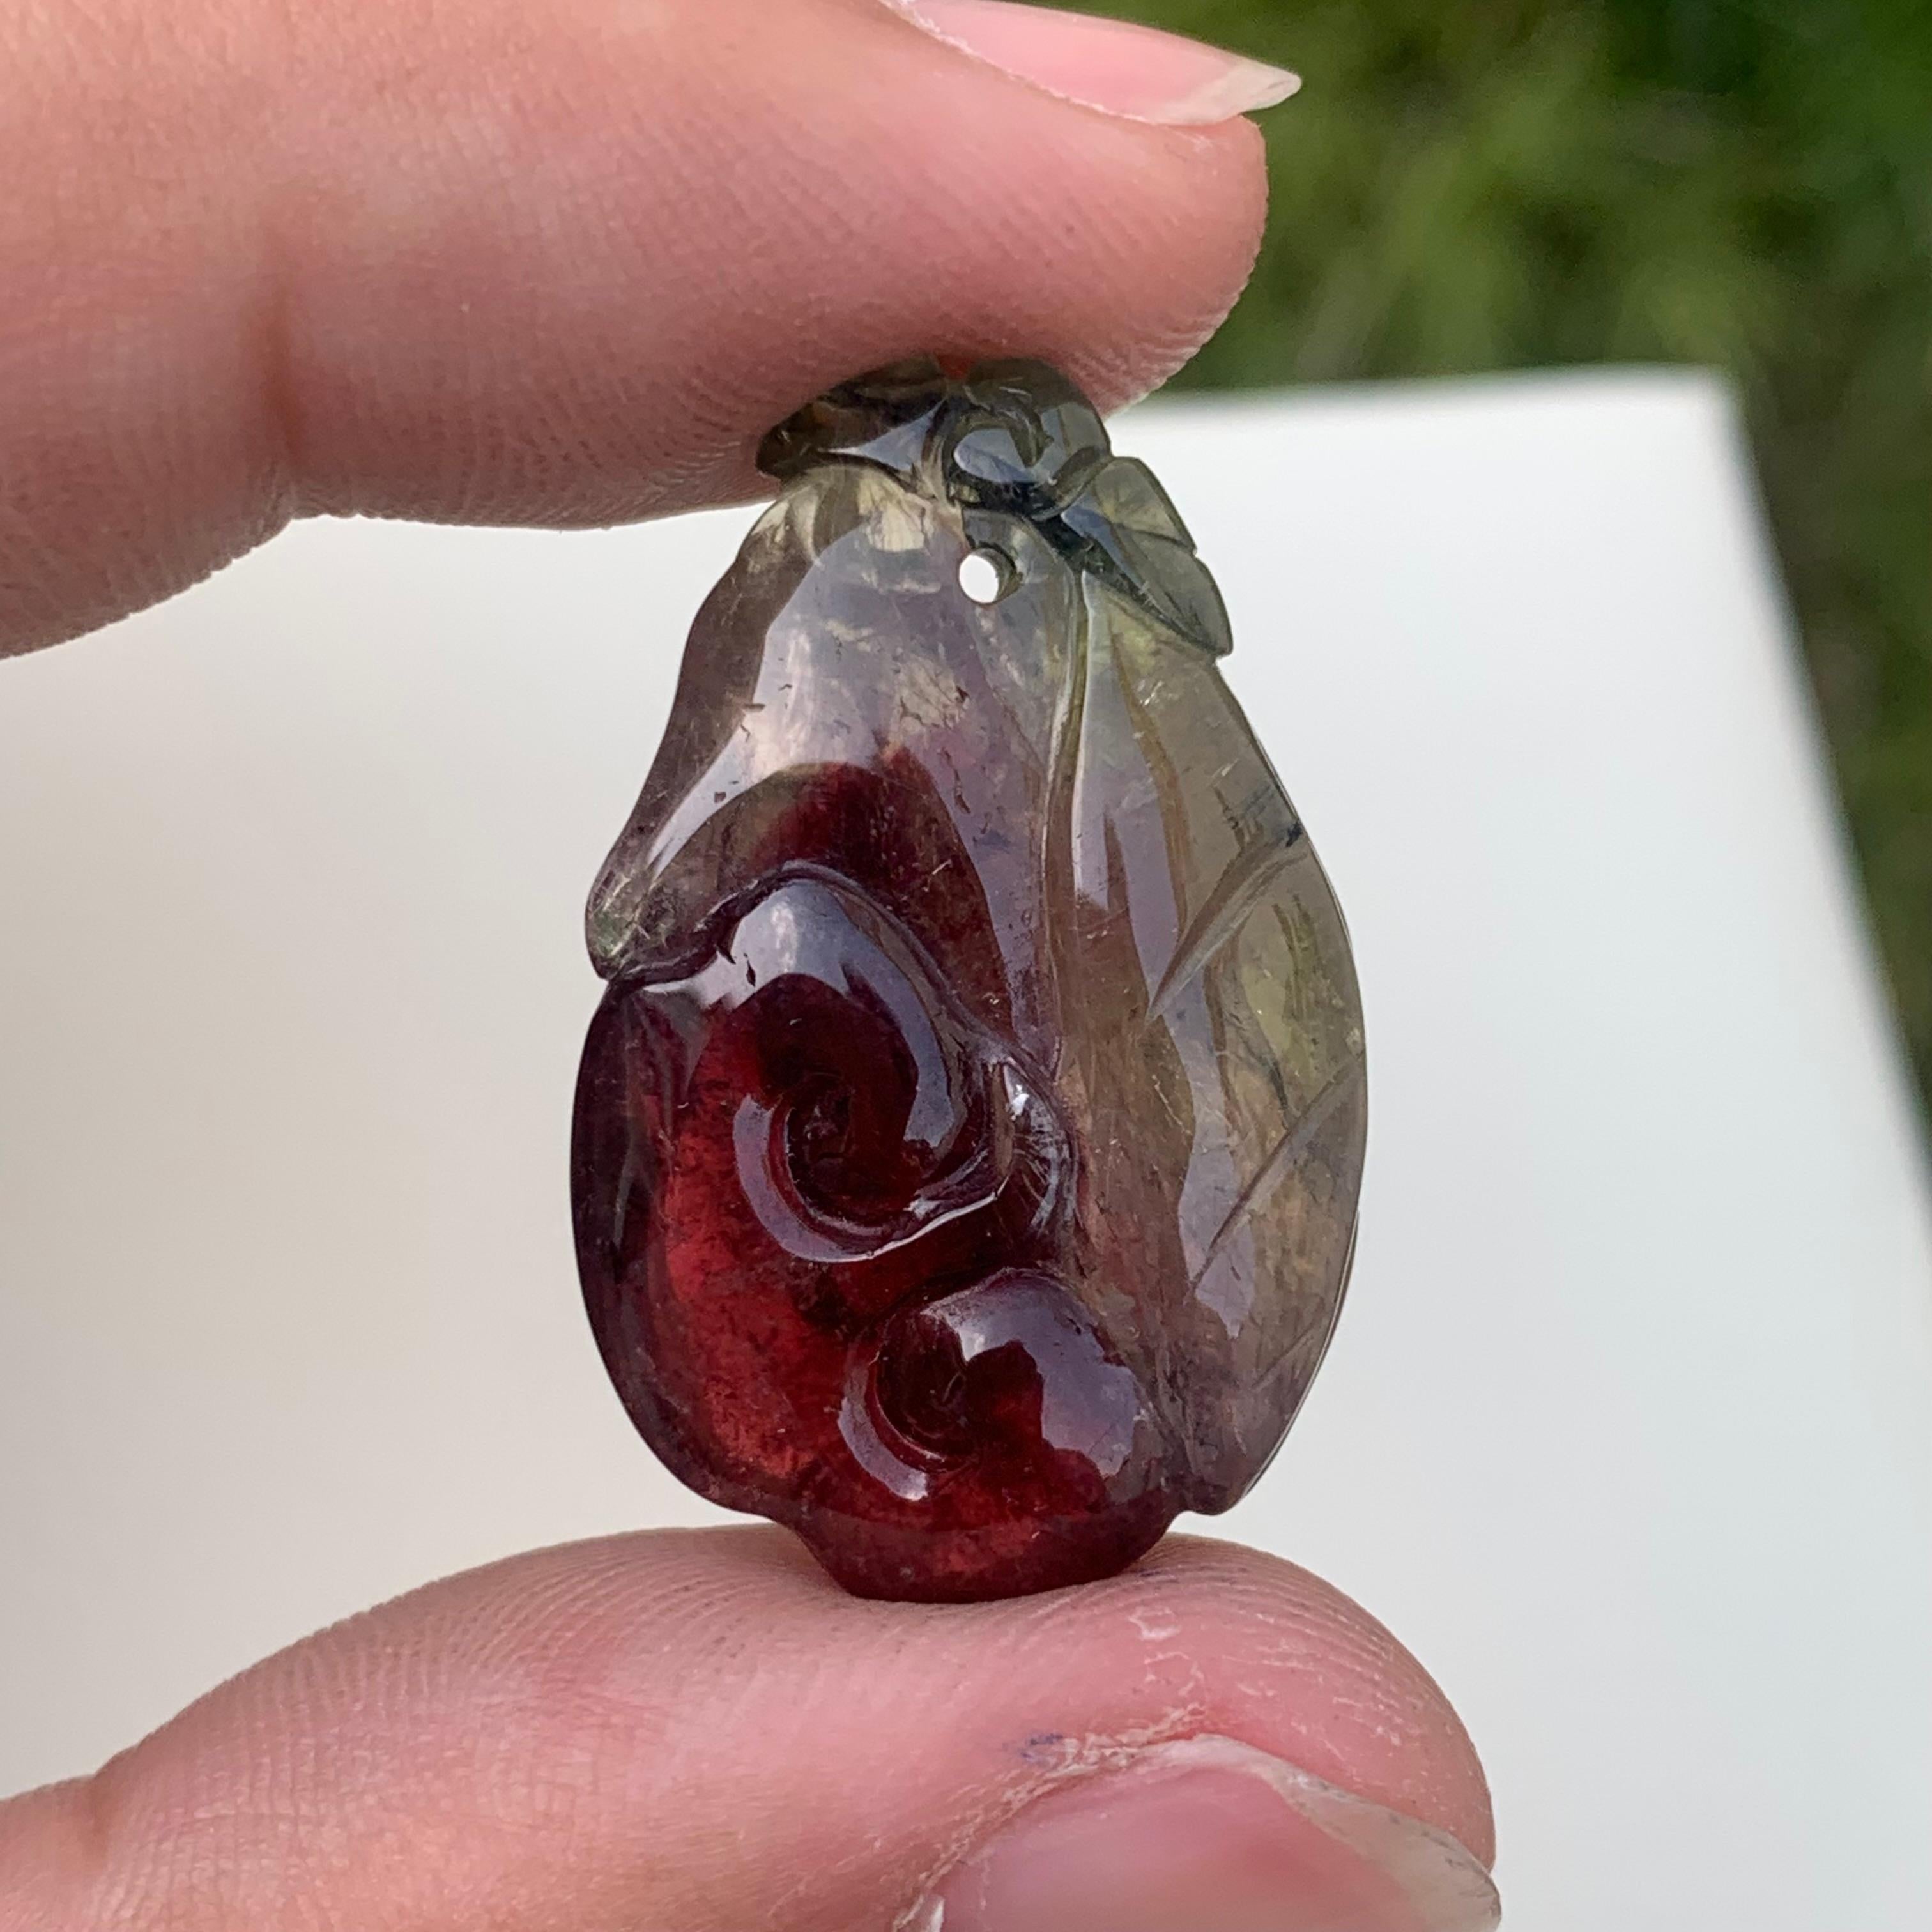 Crystal 34.60 Carat Amazing Bi Color Fruit Shape Tourmaline Drilled Carving from Africa For Sale